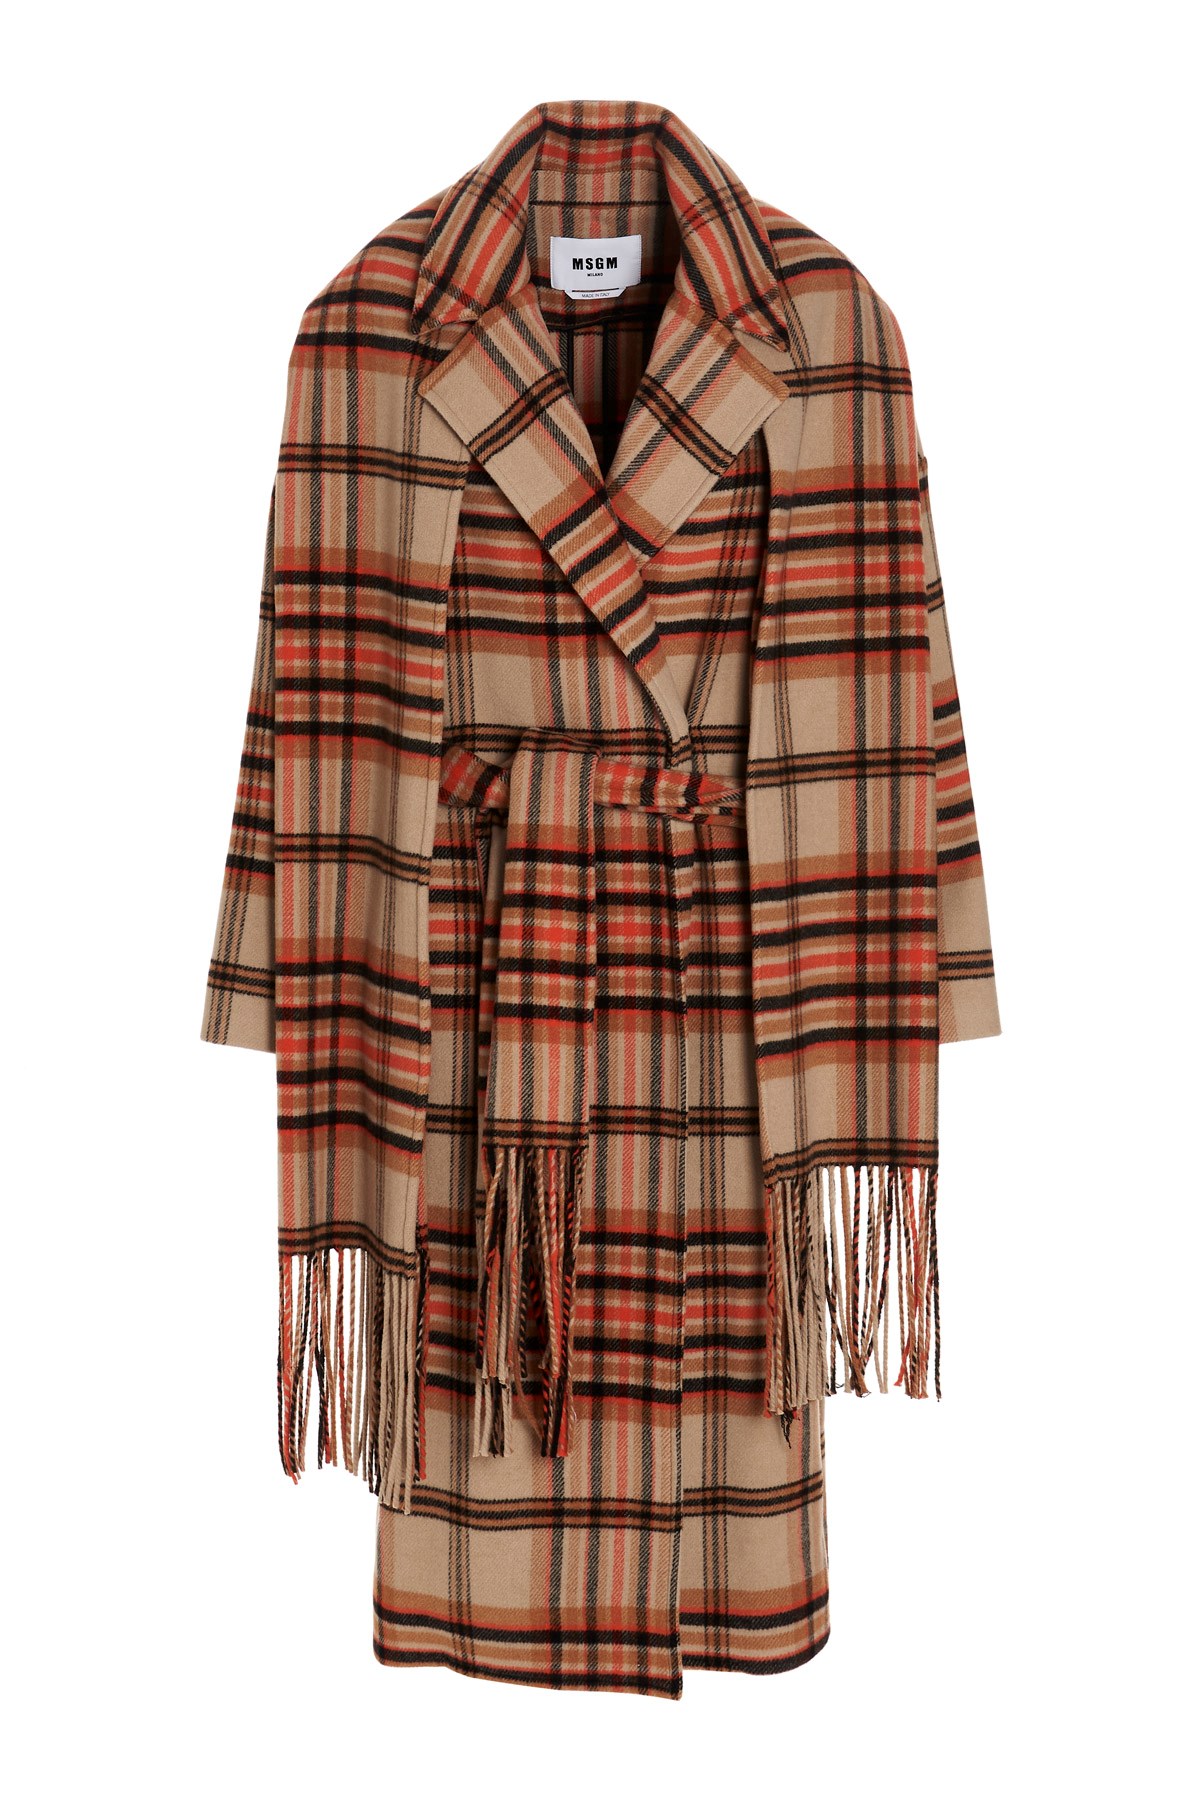 MSGM Check Belted Coat